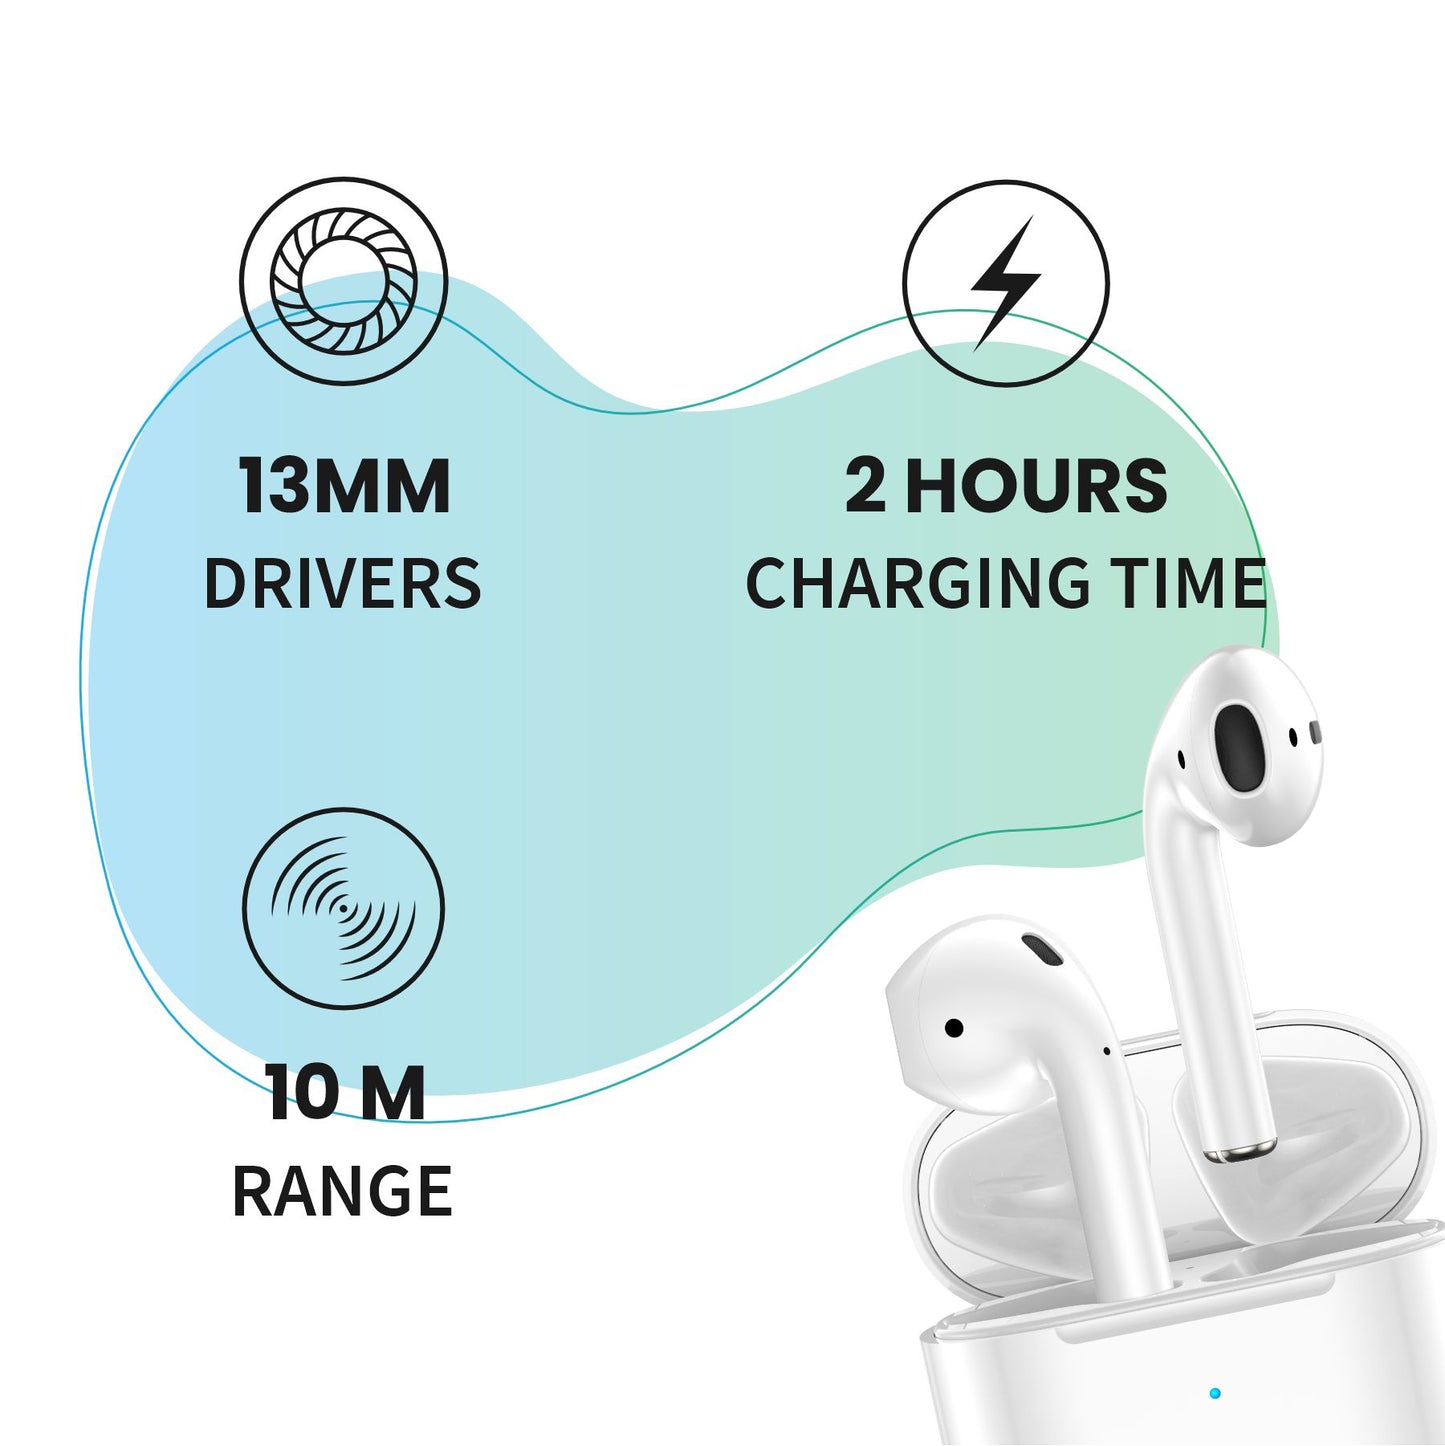 LYNE CoolPods 8 20 Hours Music Time True Wireless Earbuds